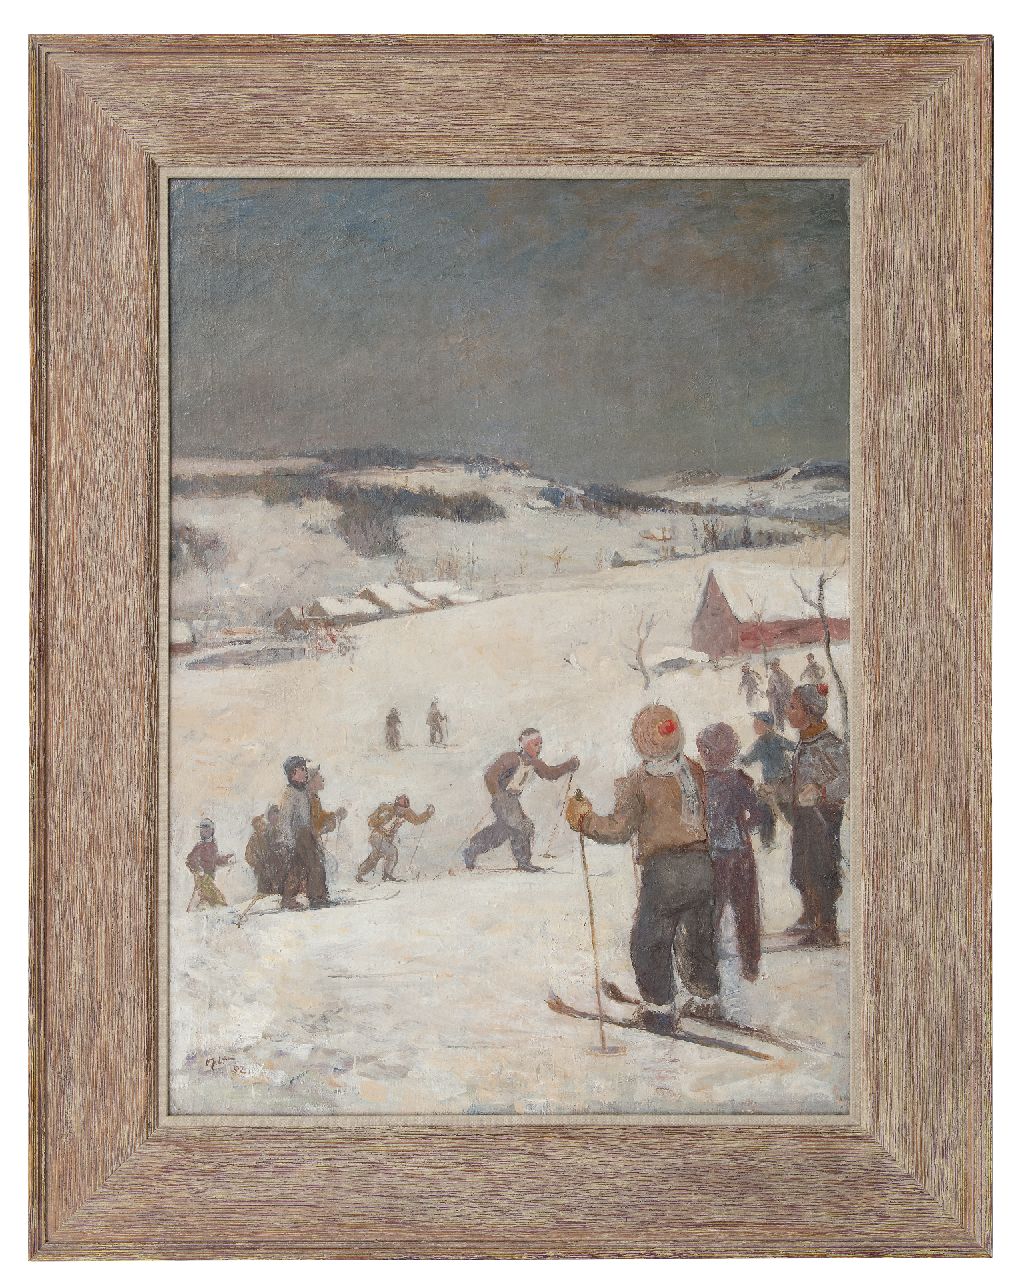 Oplt O.  | Oldřich Oplt | Paintings offered for sale | The skiing race, oil on canvas 99.7 x 72.8 cm, signed l.l. and dated '52